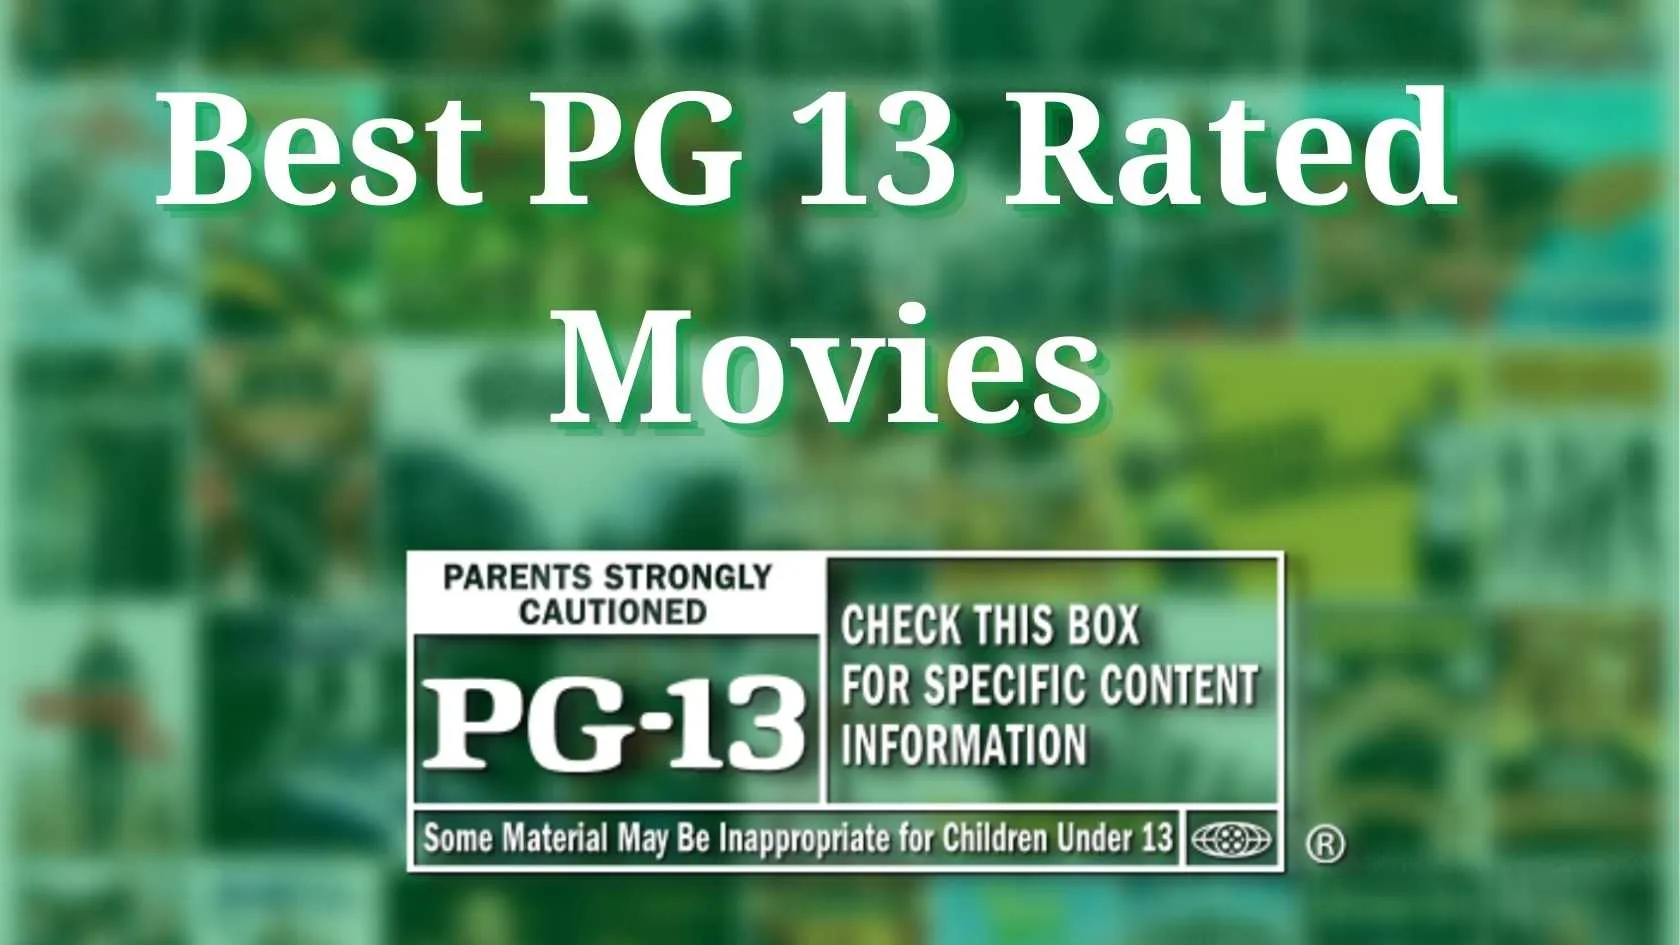 Best PG 13 Rated Movies